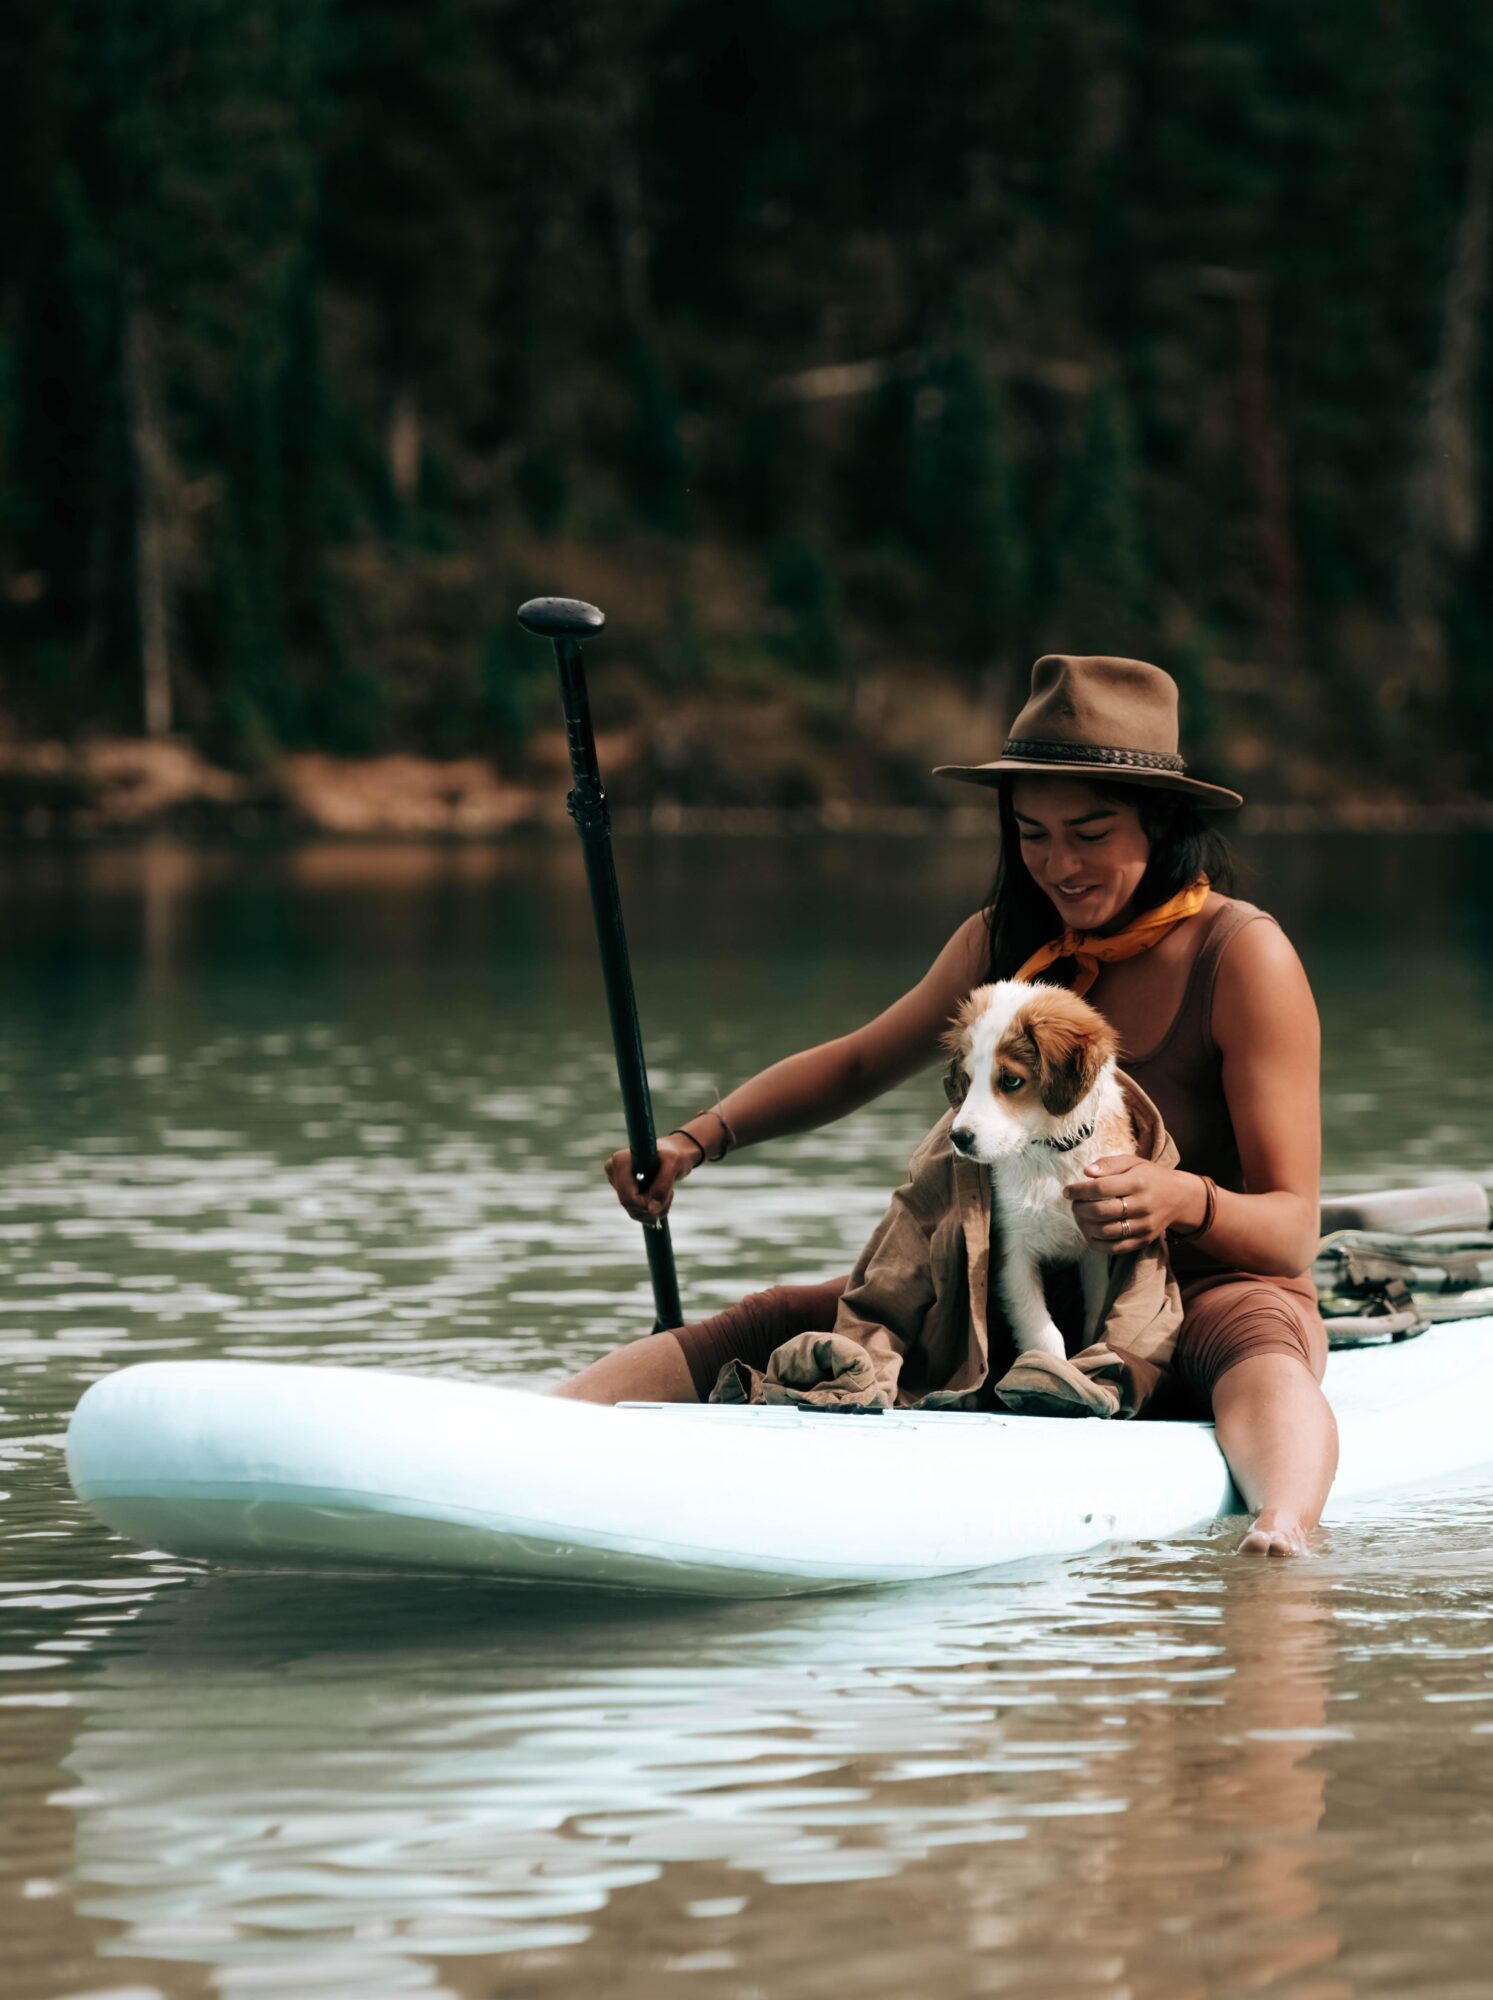 A person and a dog on a paddle board in a calm lake, surrounded by trees and a shoreline.